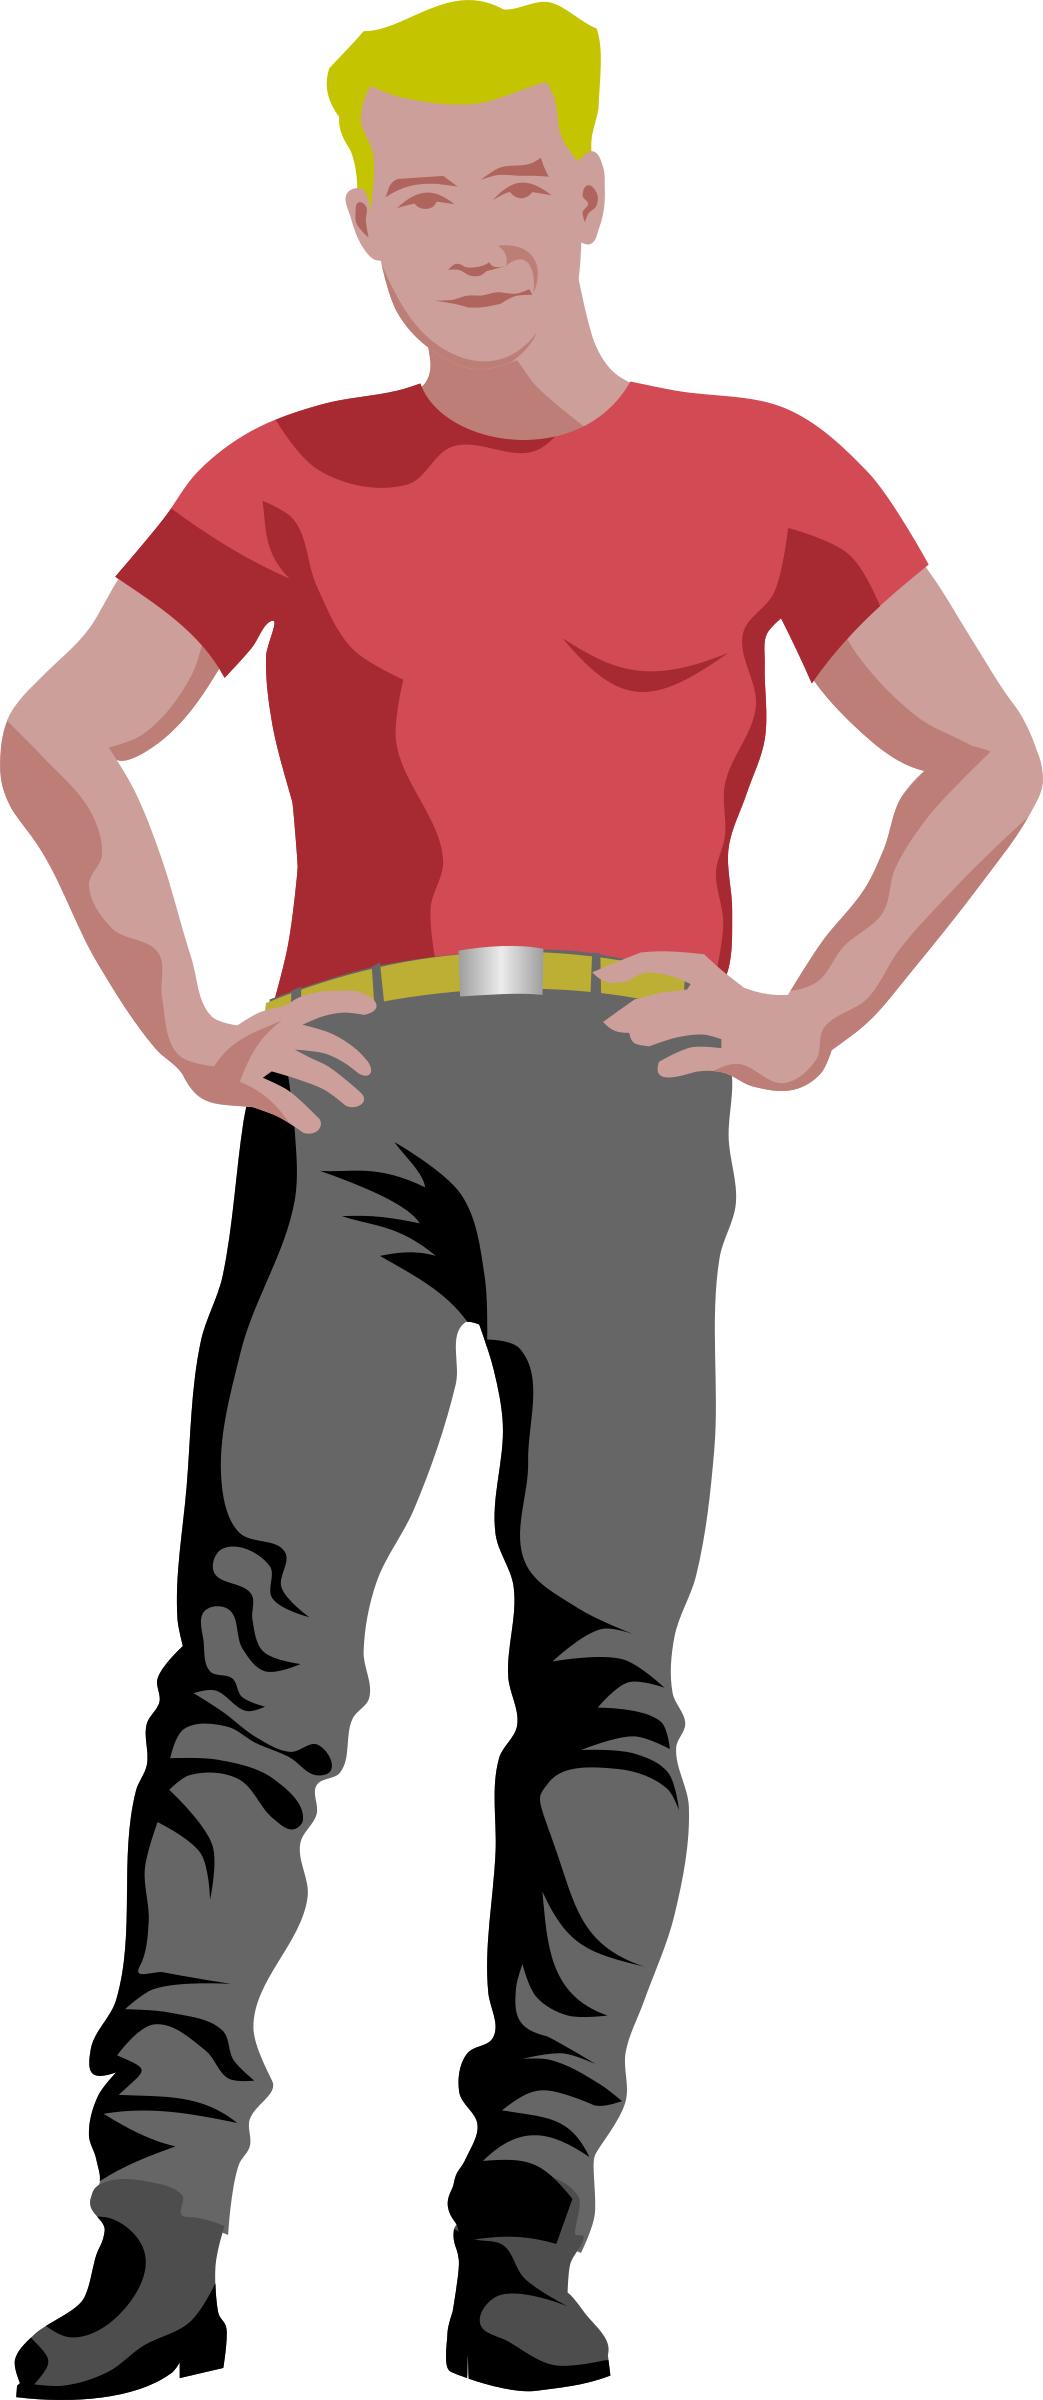 Assertive guy by Rones. Posterized png